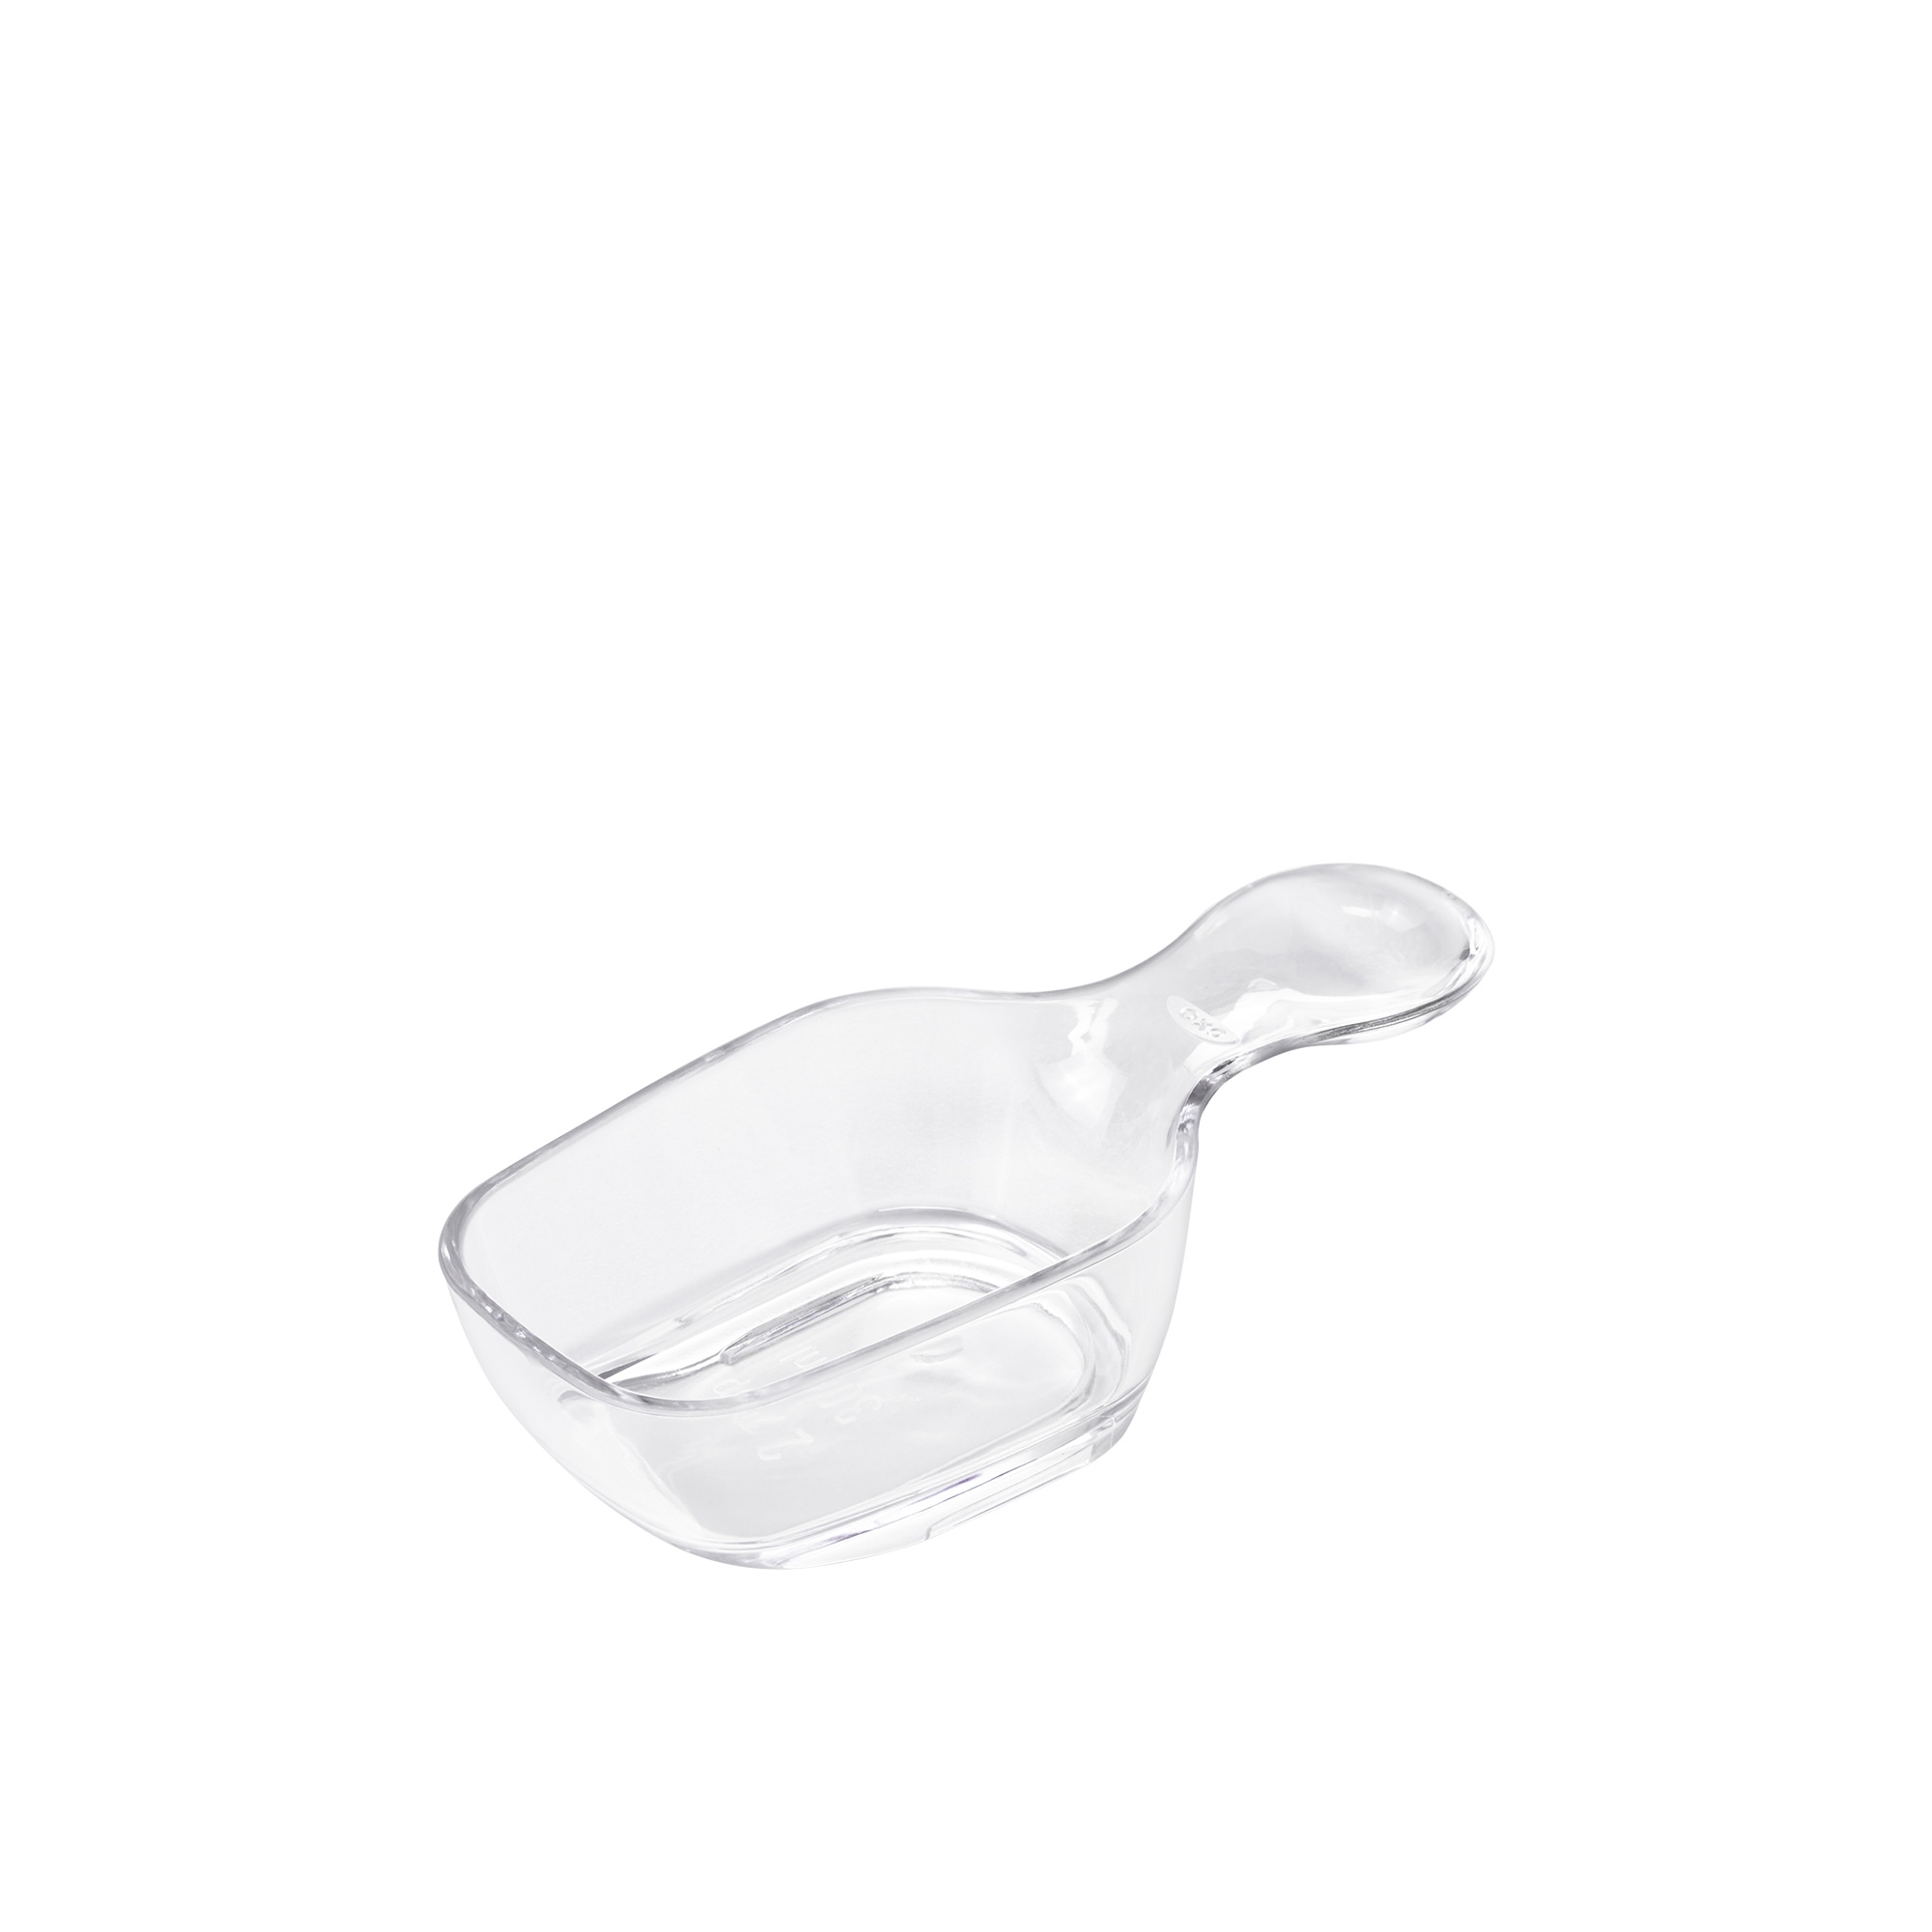 OXO Good Grips Pop Container Coffee Scoop Image 1